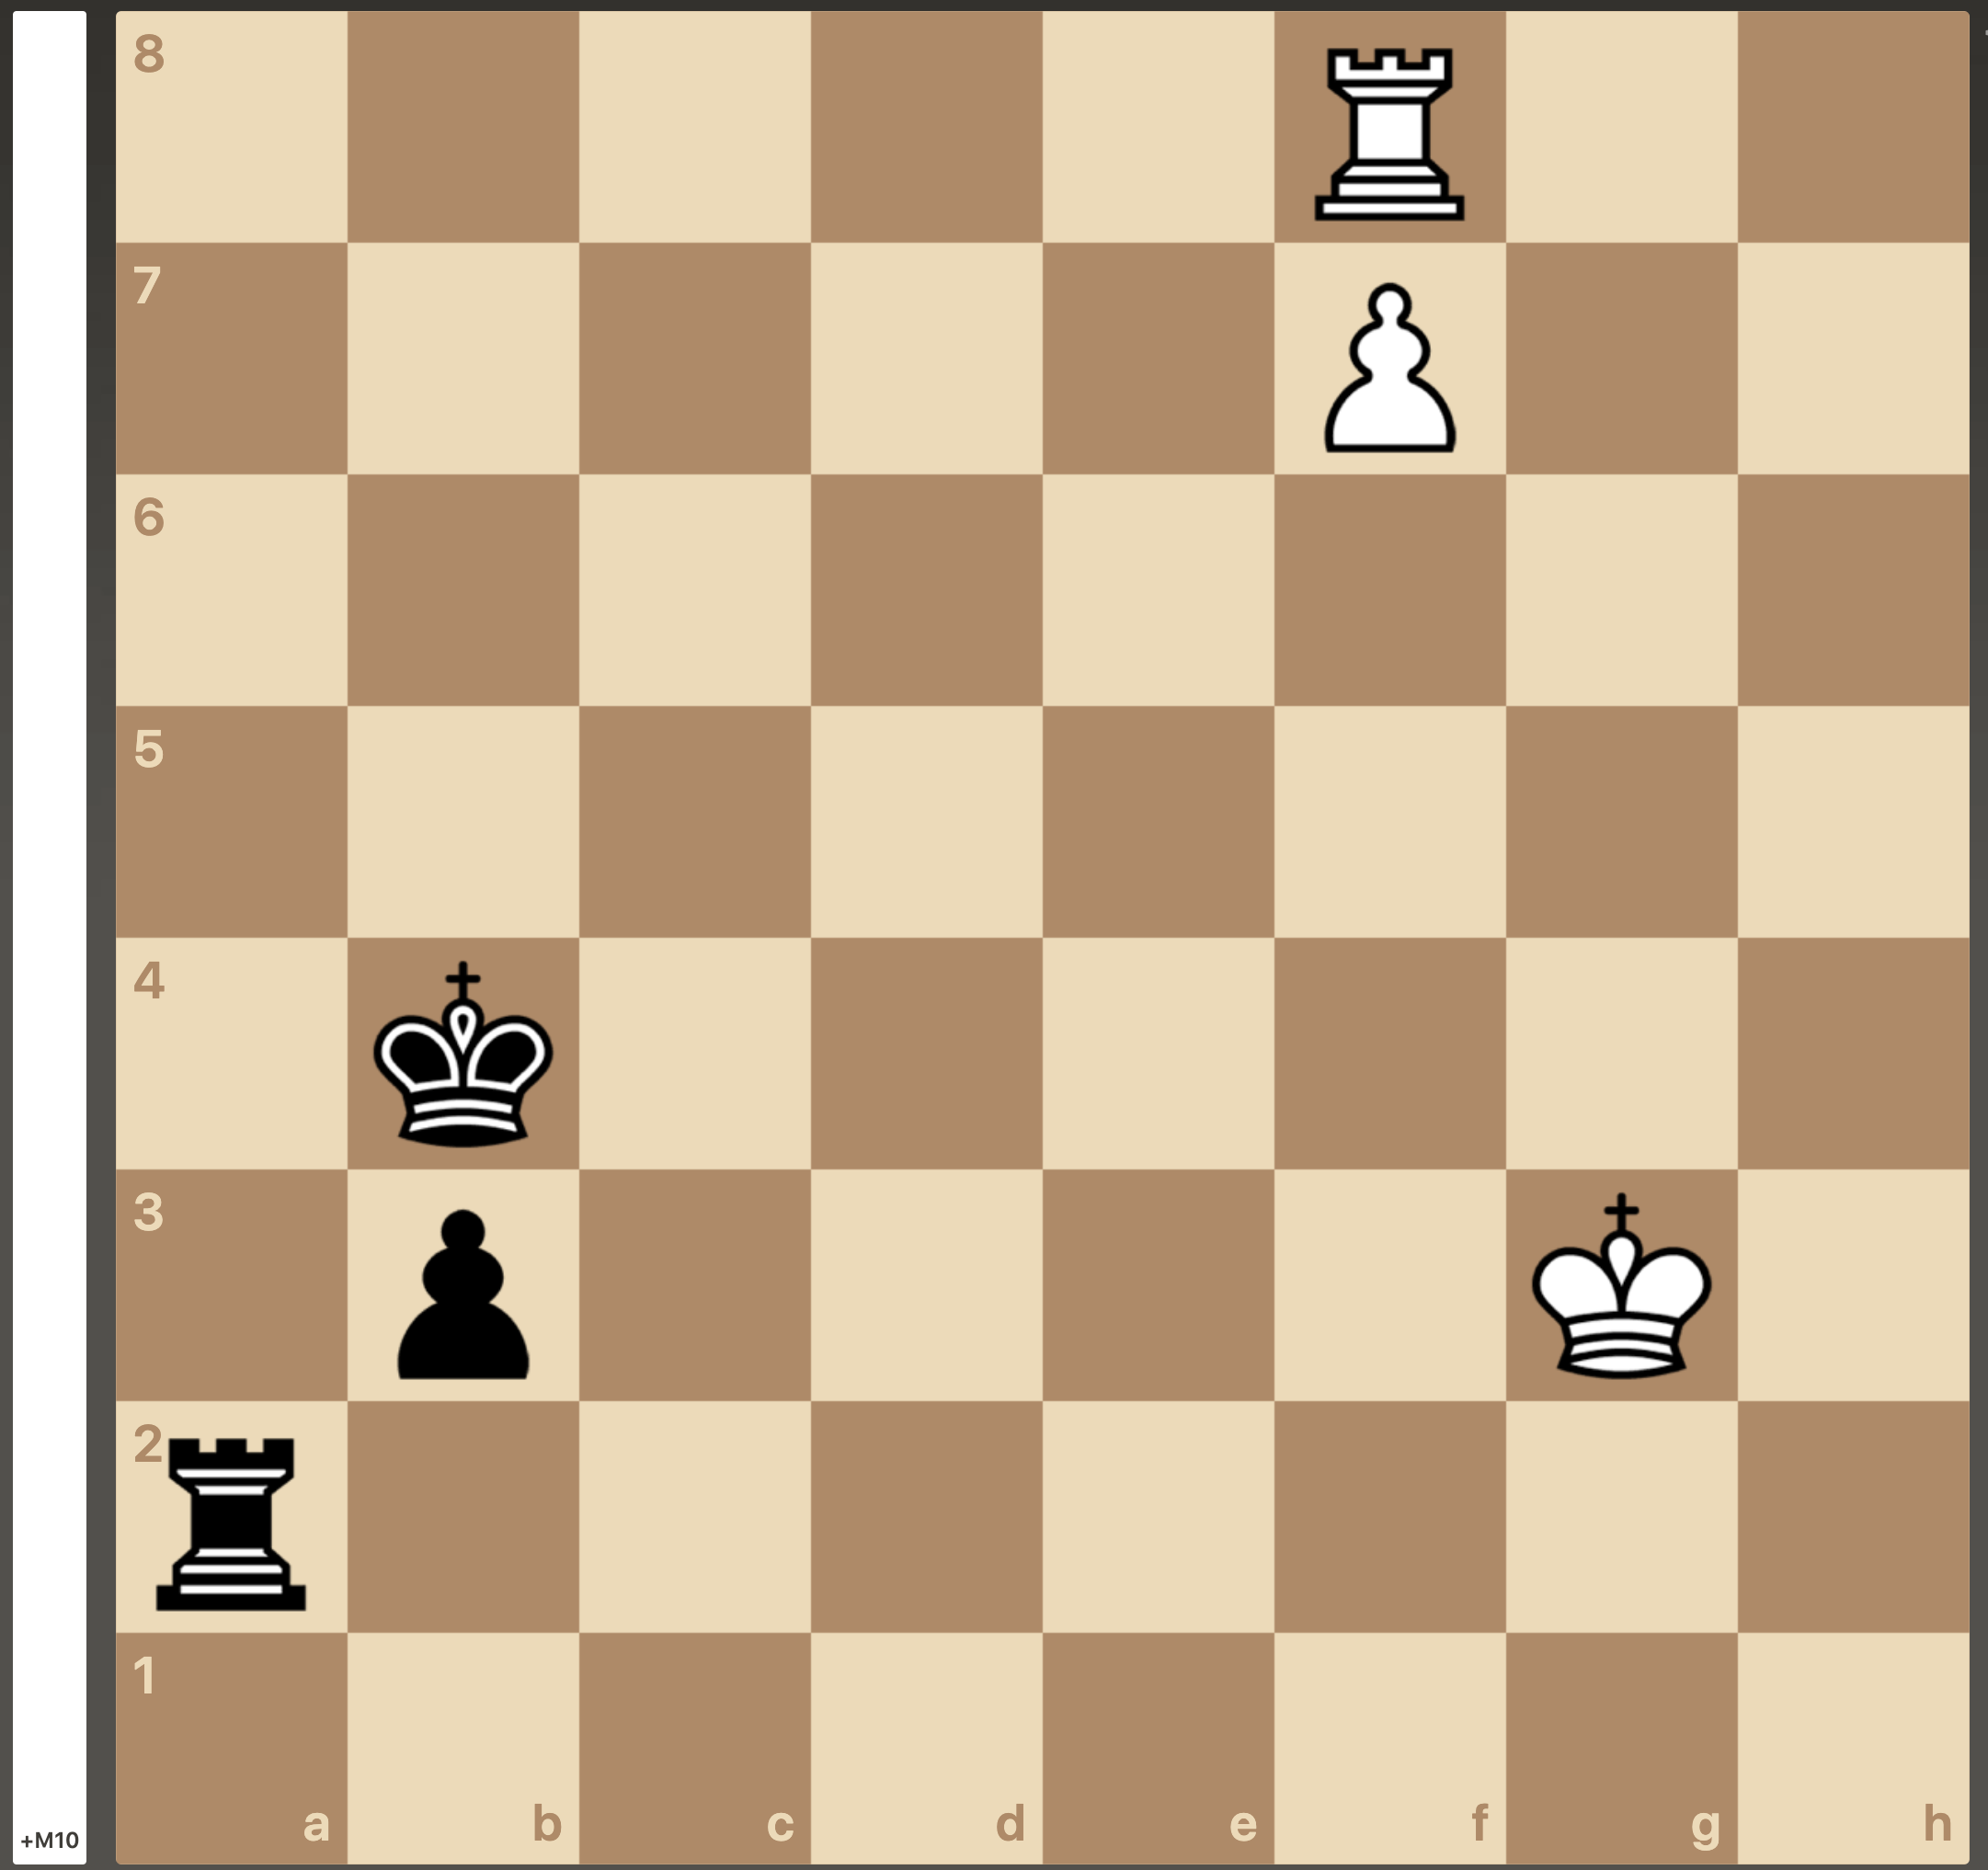 Has any human beaten or drawn against a chess engine such as